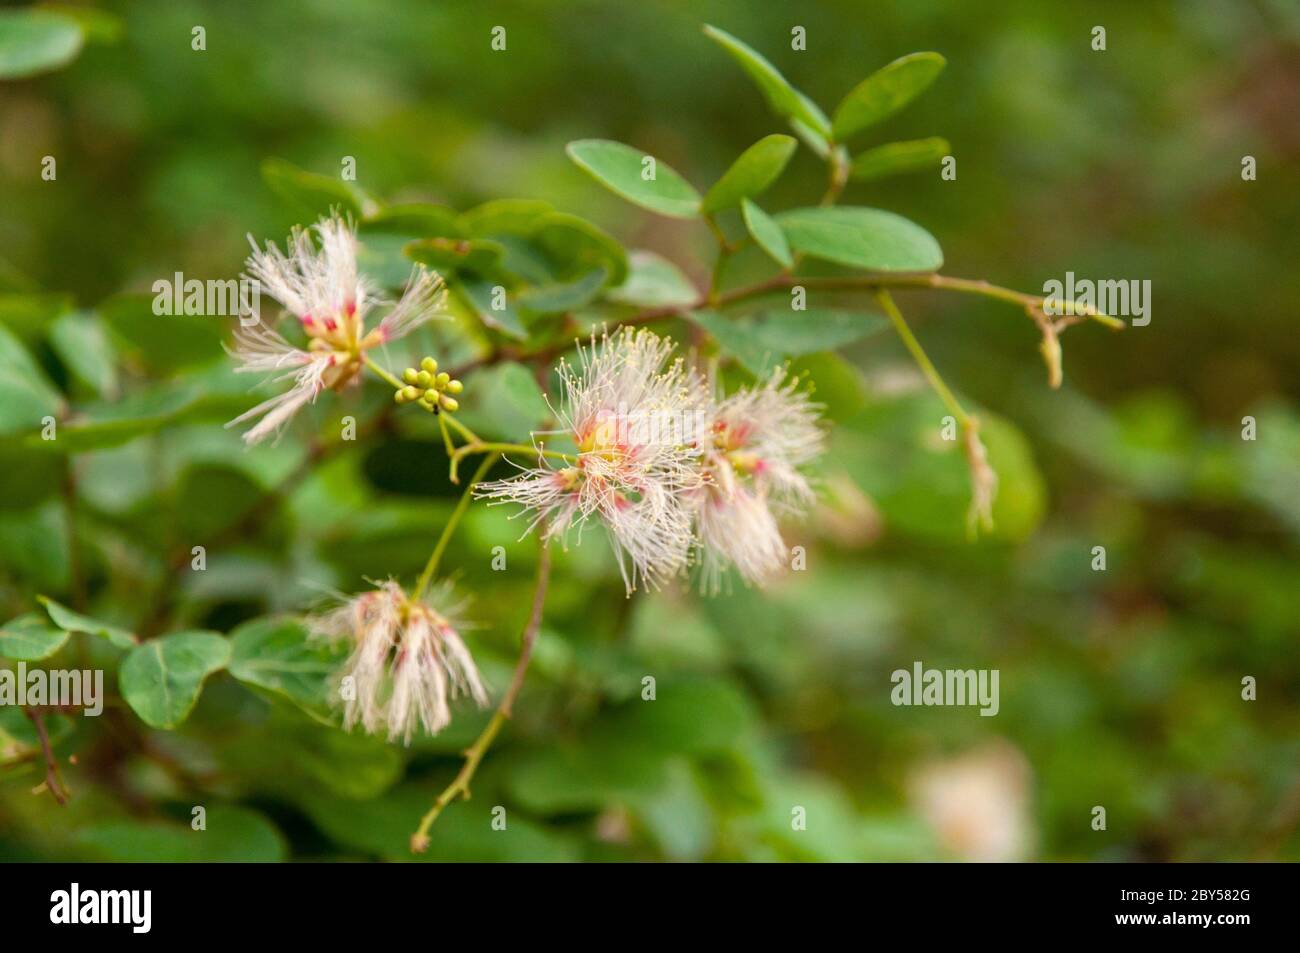 Close-up of a white wild flower of Guamúchil tree (Pithecellobium dulce) a tropical plant part of the pea family, Fabaceae Stock Photo